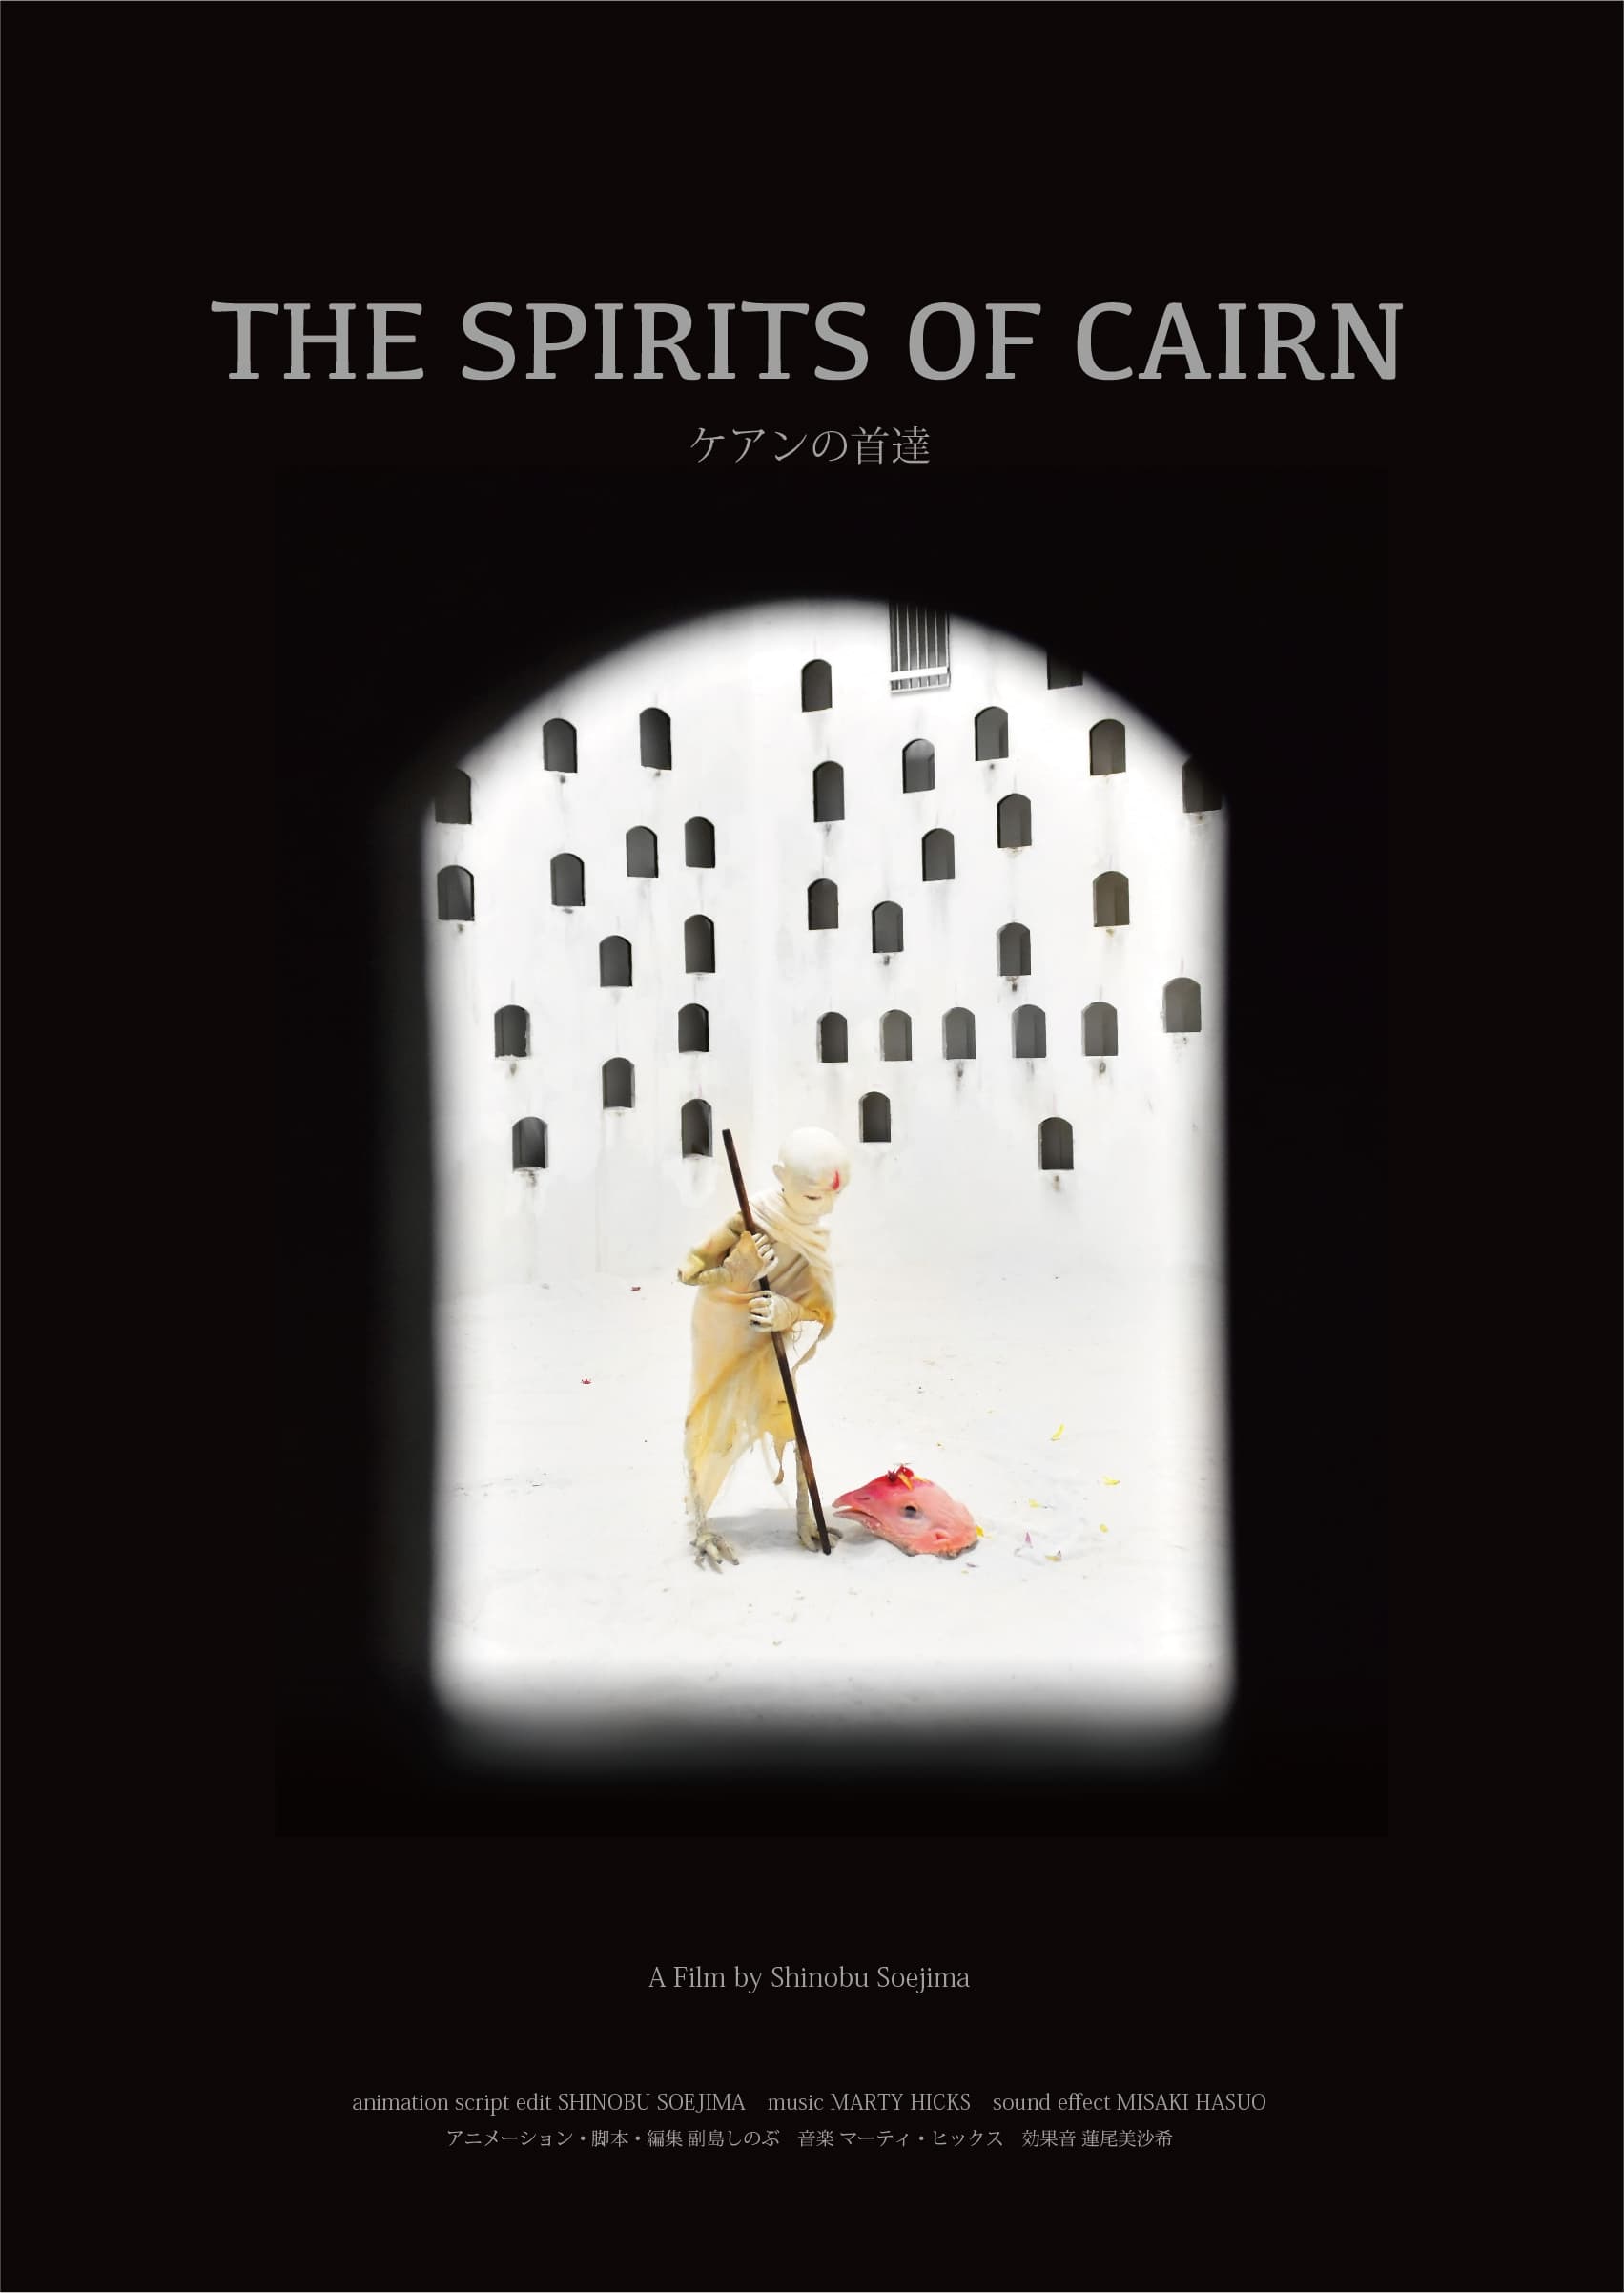 The Spirits of Cairn